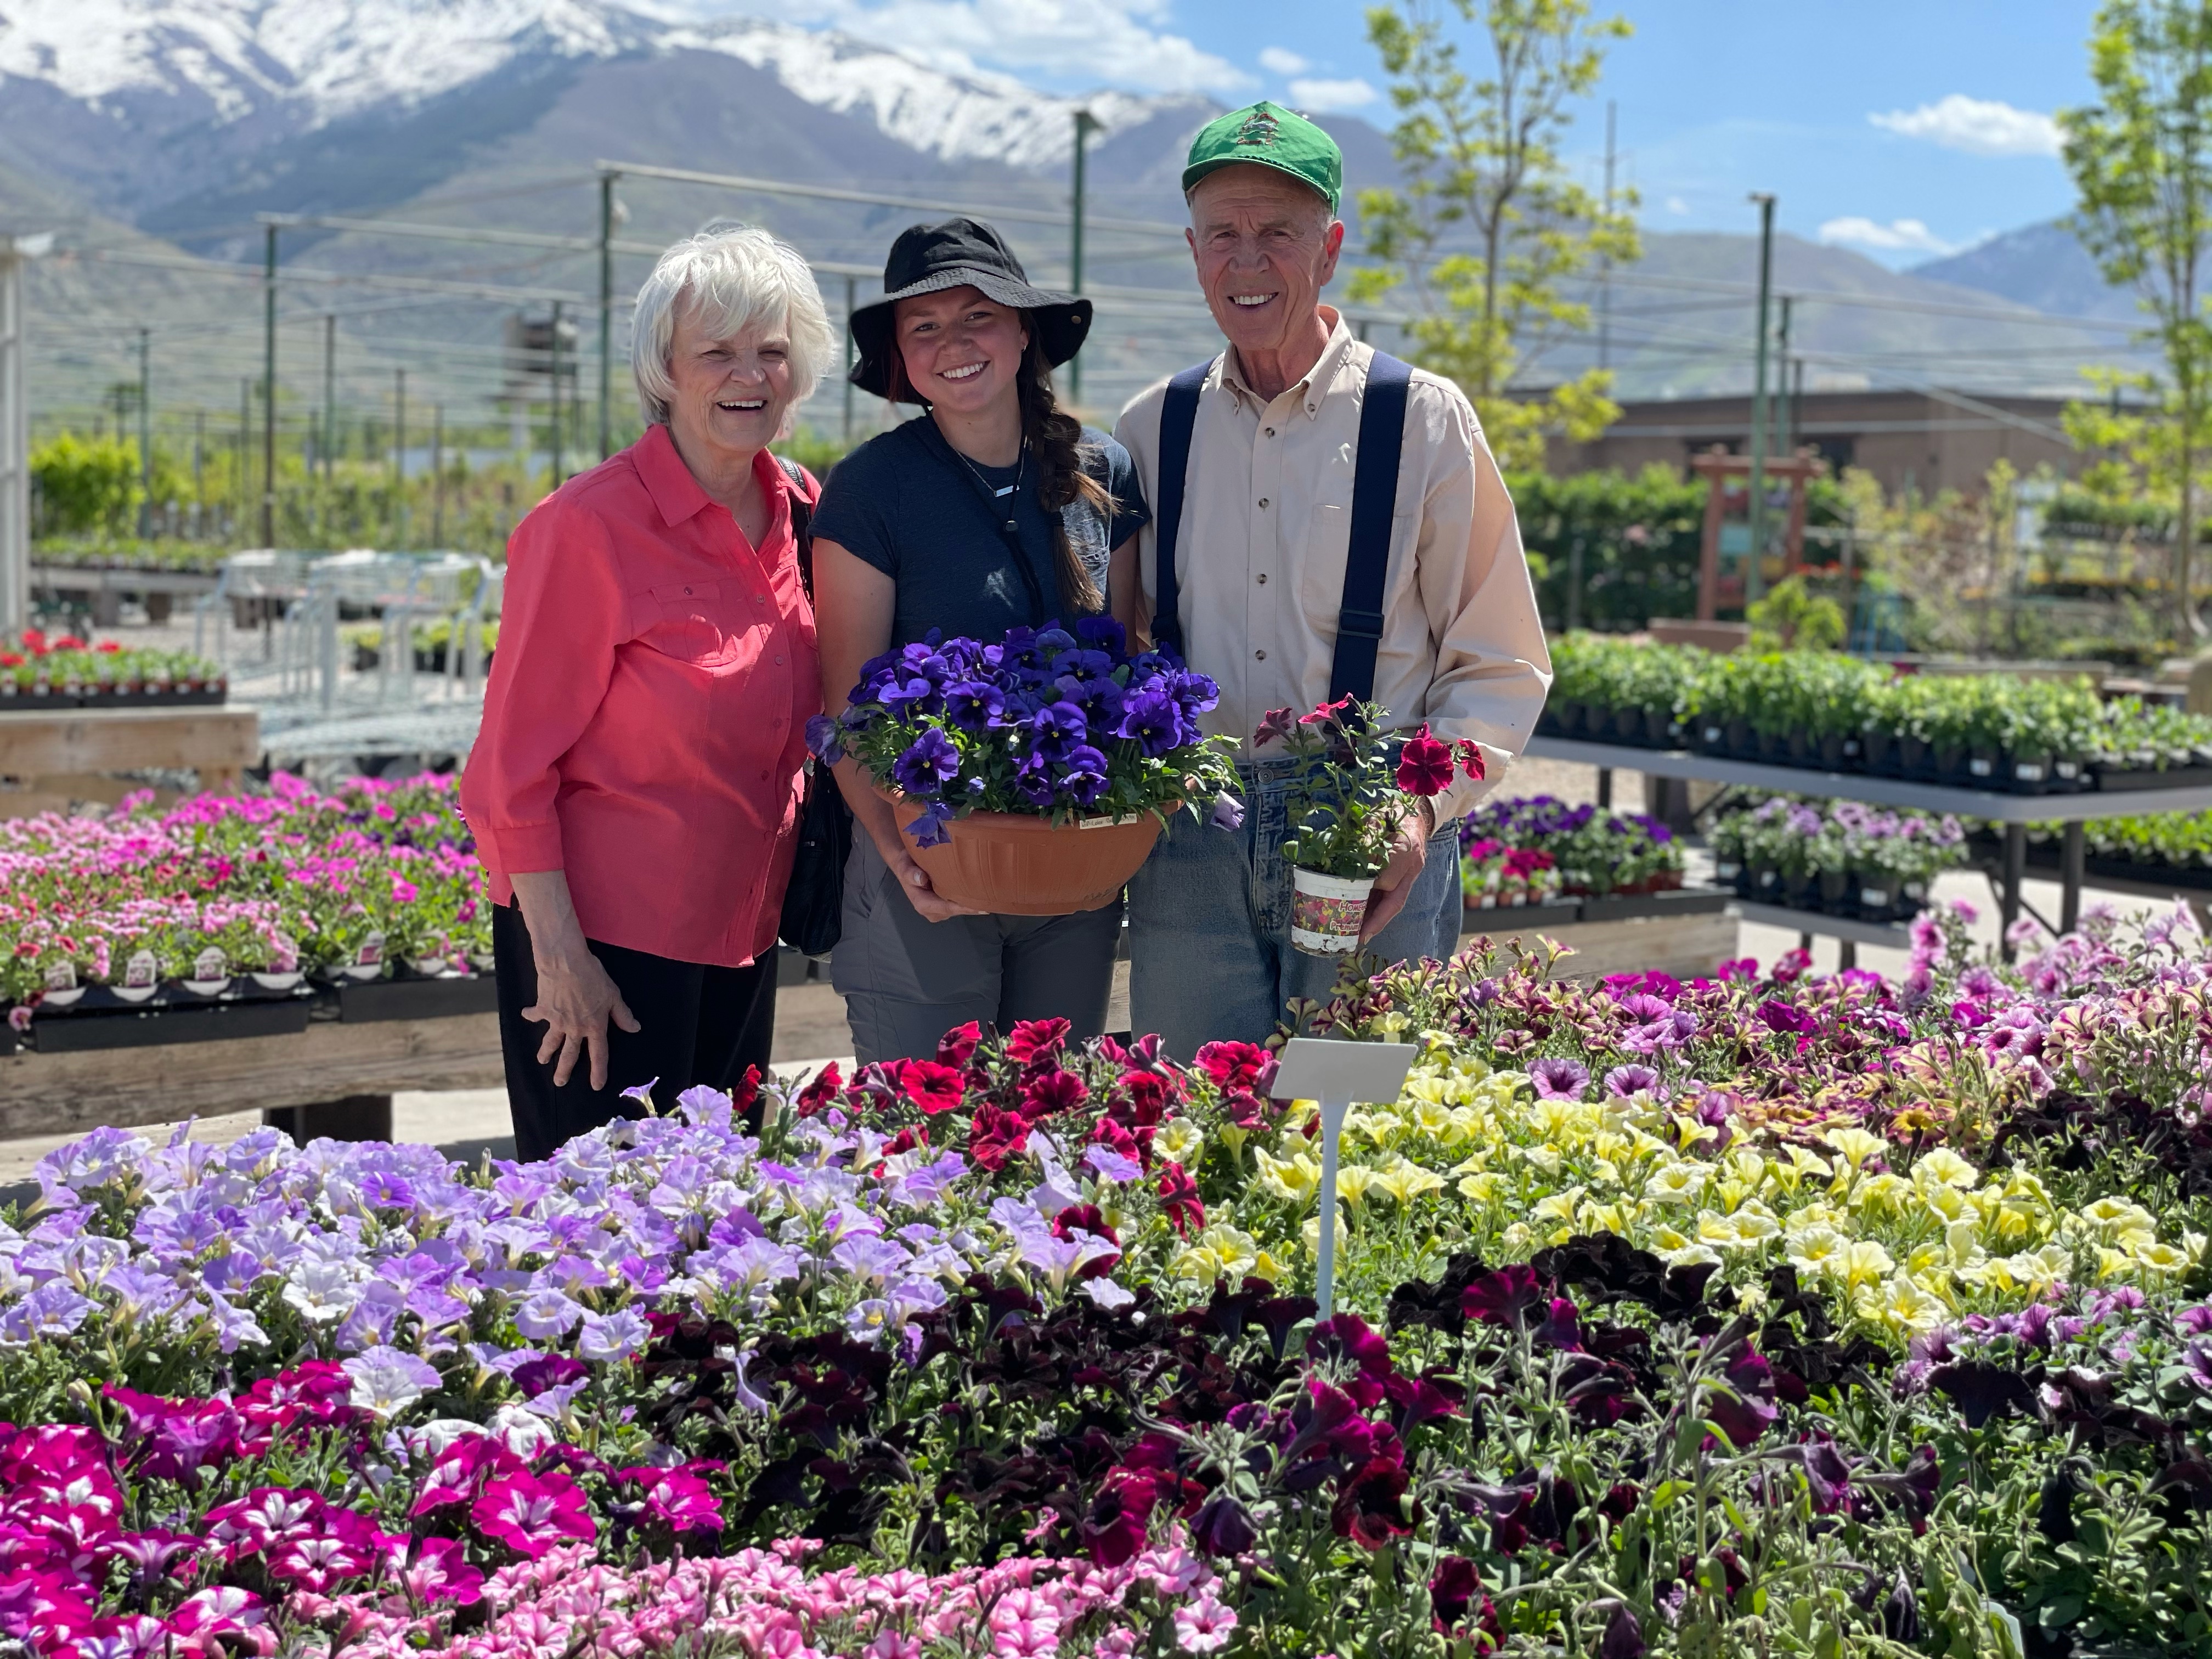 family smiling standing amongst flowers at botanicals kaysville garden center retail location